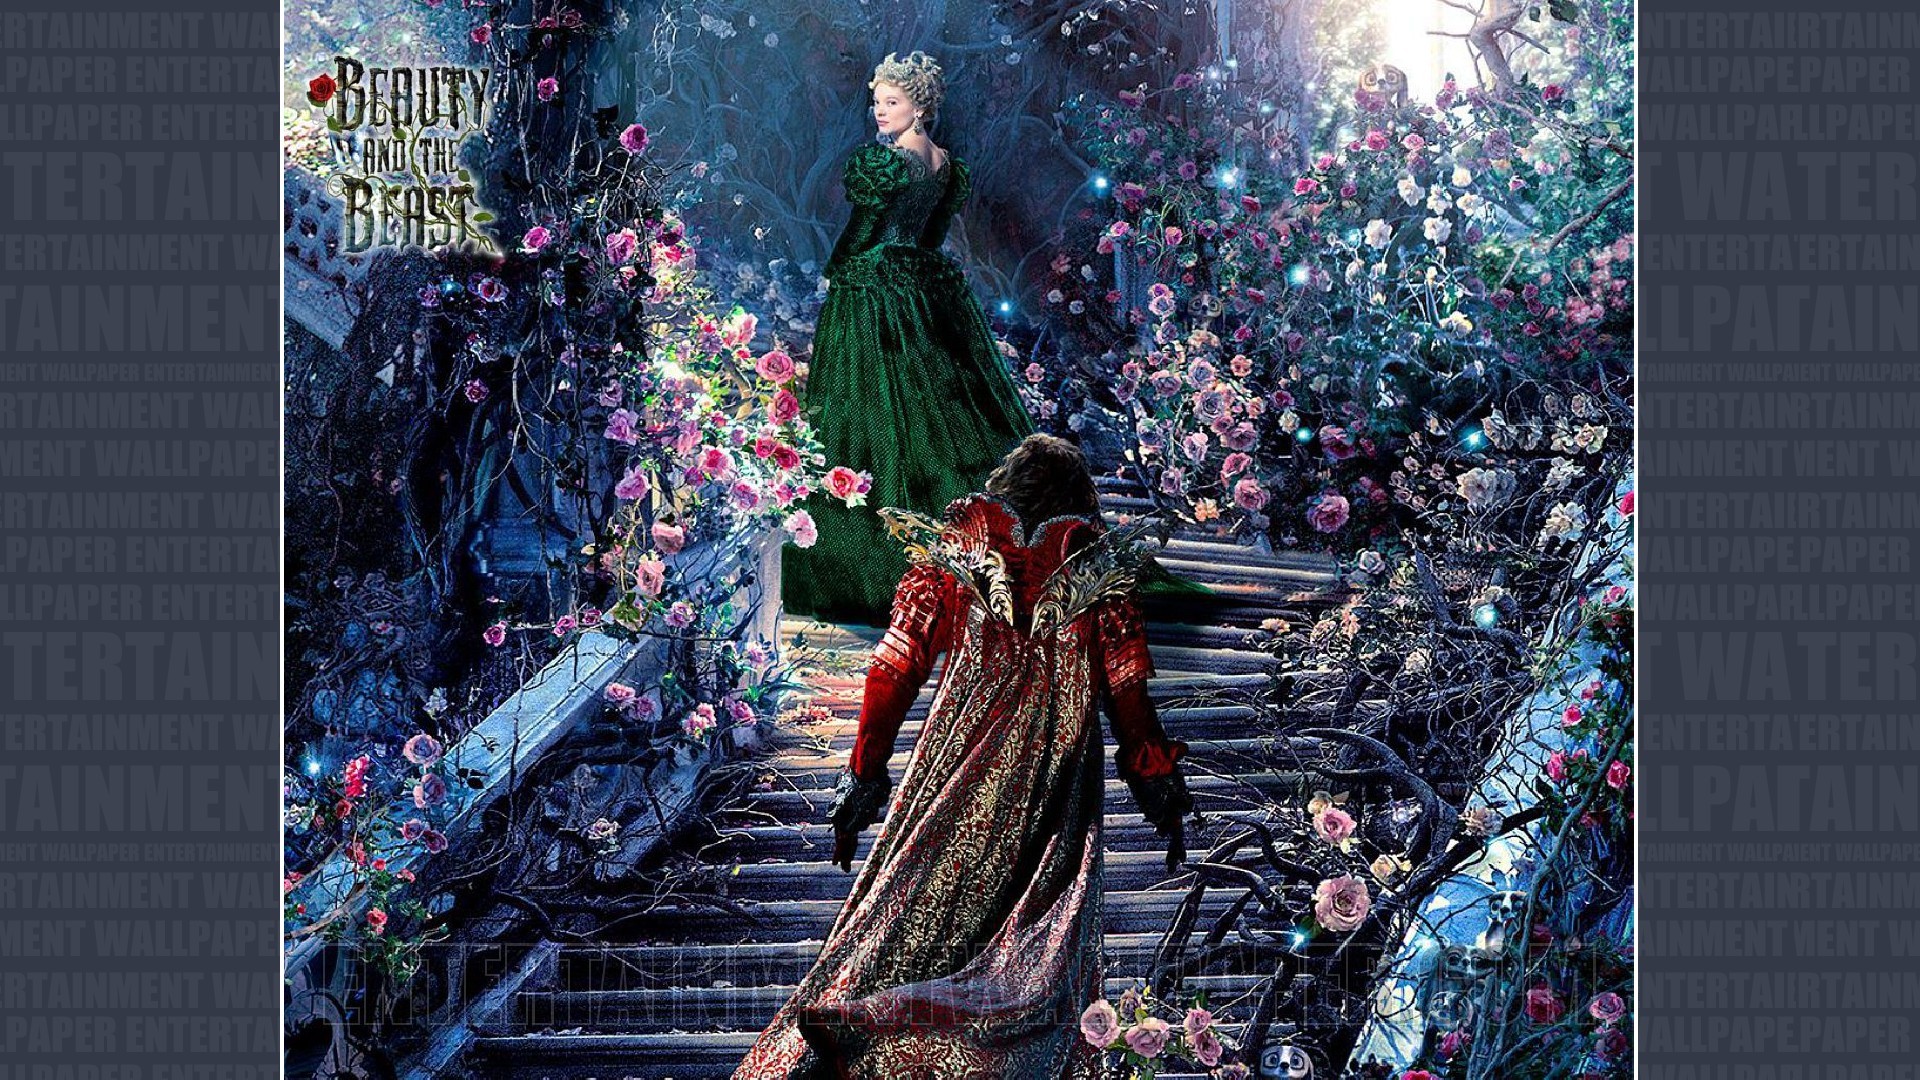 1920x1080 Beauty and the Beast (2014) Wallpaper - Original size, download now.